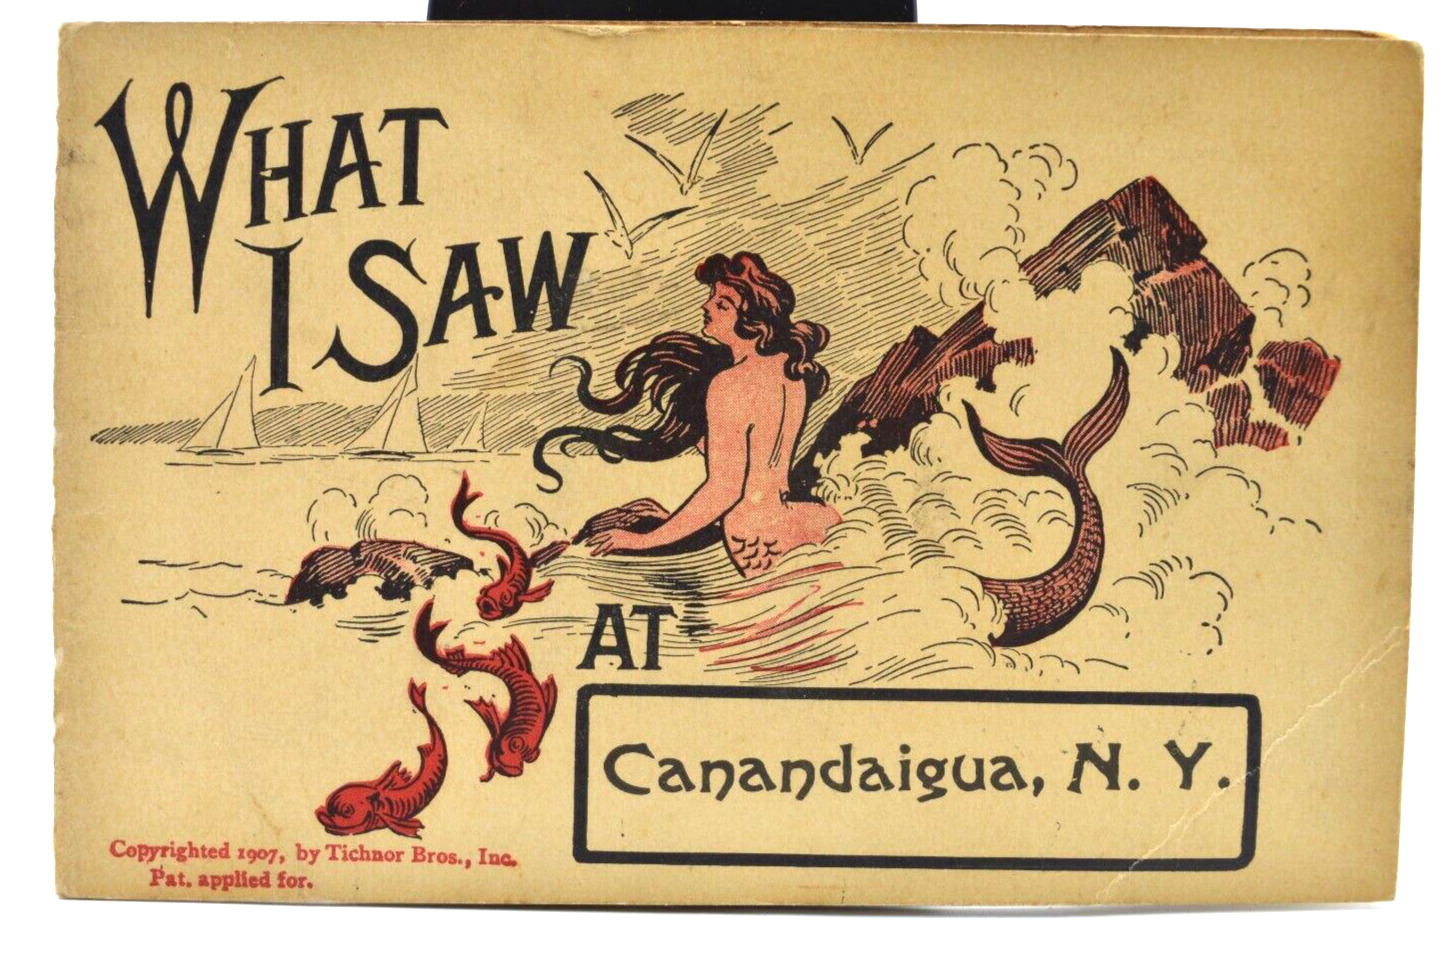 1907 Antique Postcard What I Saw at Canandaigua NY Mermaid Fold Out Tichnor Bros